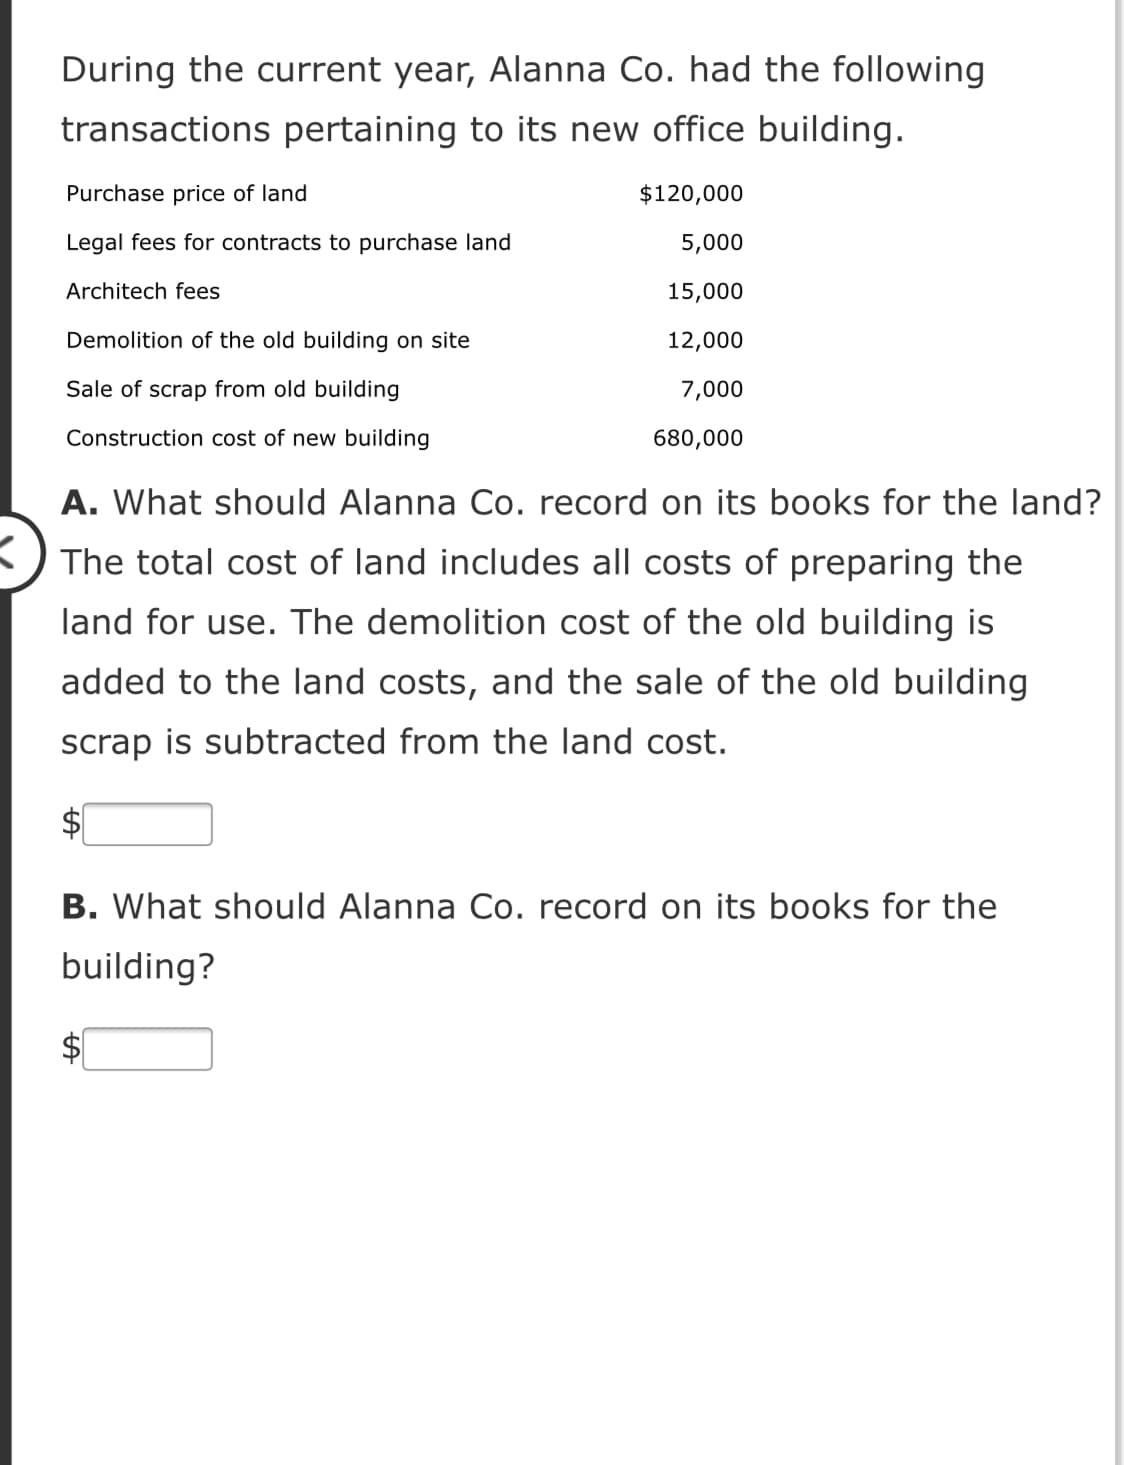 During the current year, Alanna Co. had the following
transactions pertaining to its new office building.
Purchase price of land
$120,000
Legal fees for contracts to purchase land
5,000
Architech fees
15,000
Demolition of the old building on site
12,000
Sale of scrap from old building
7,000
Construction cost of new building
680,000
A. What should Alanna Co. record on its books for the land?
K) The total cost of land includes all costs of preparing the
land for use. The demolition cost of the old building is
added to the land costs, and the sale of the old building
scrap is subtracted from the land cost.
$1
B. What should Alanna Co. record on its books for the
building?
